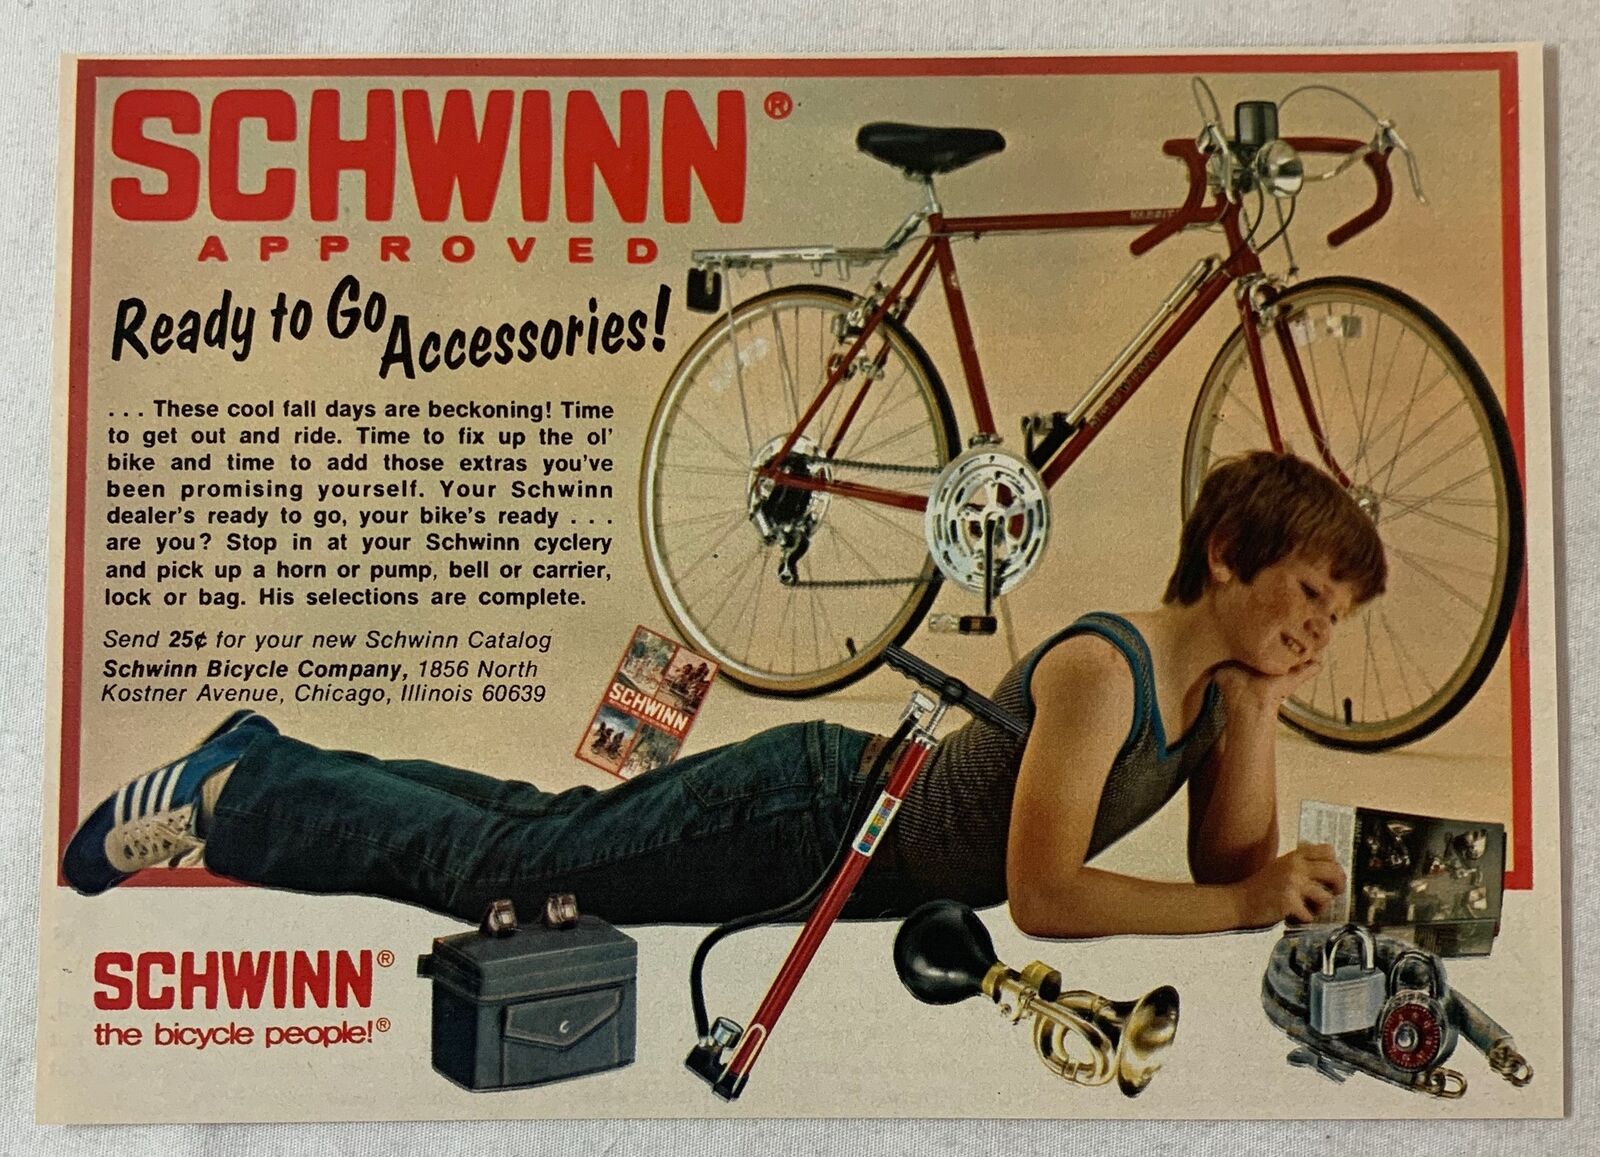 1977 SCHWINN bicycle accessories ad ~ READY TO GO